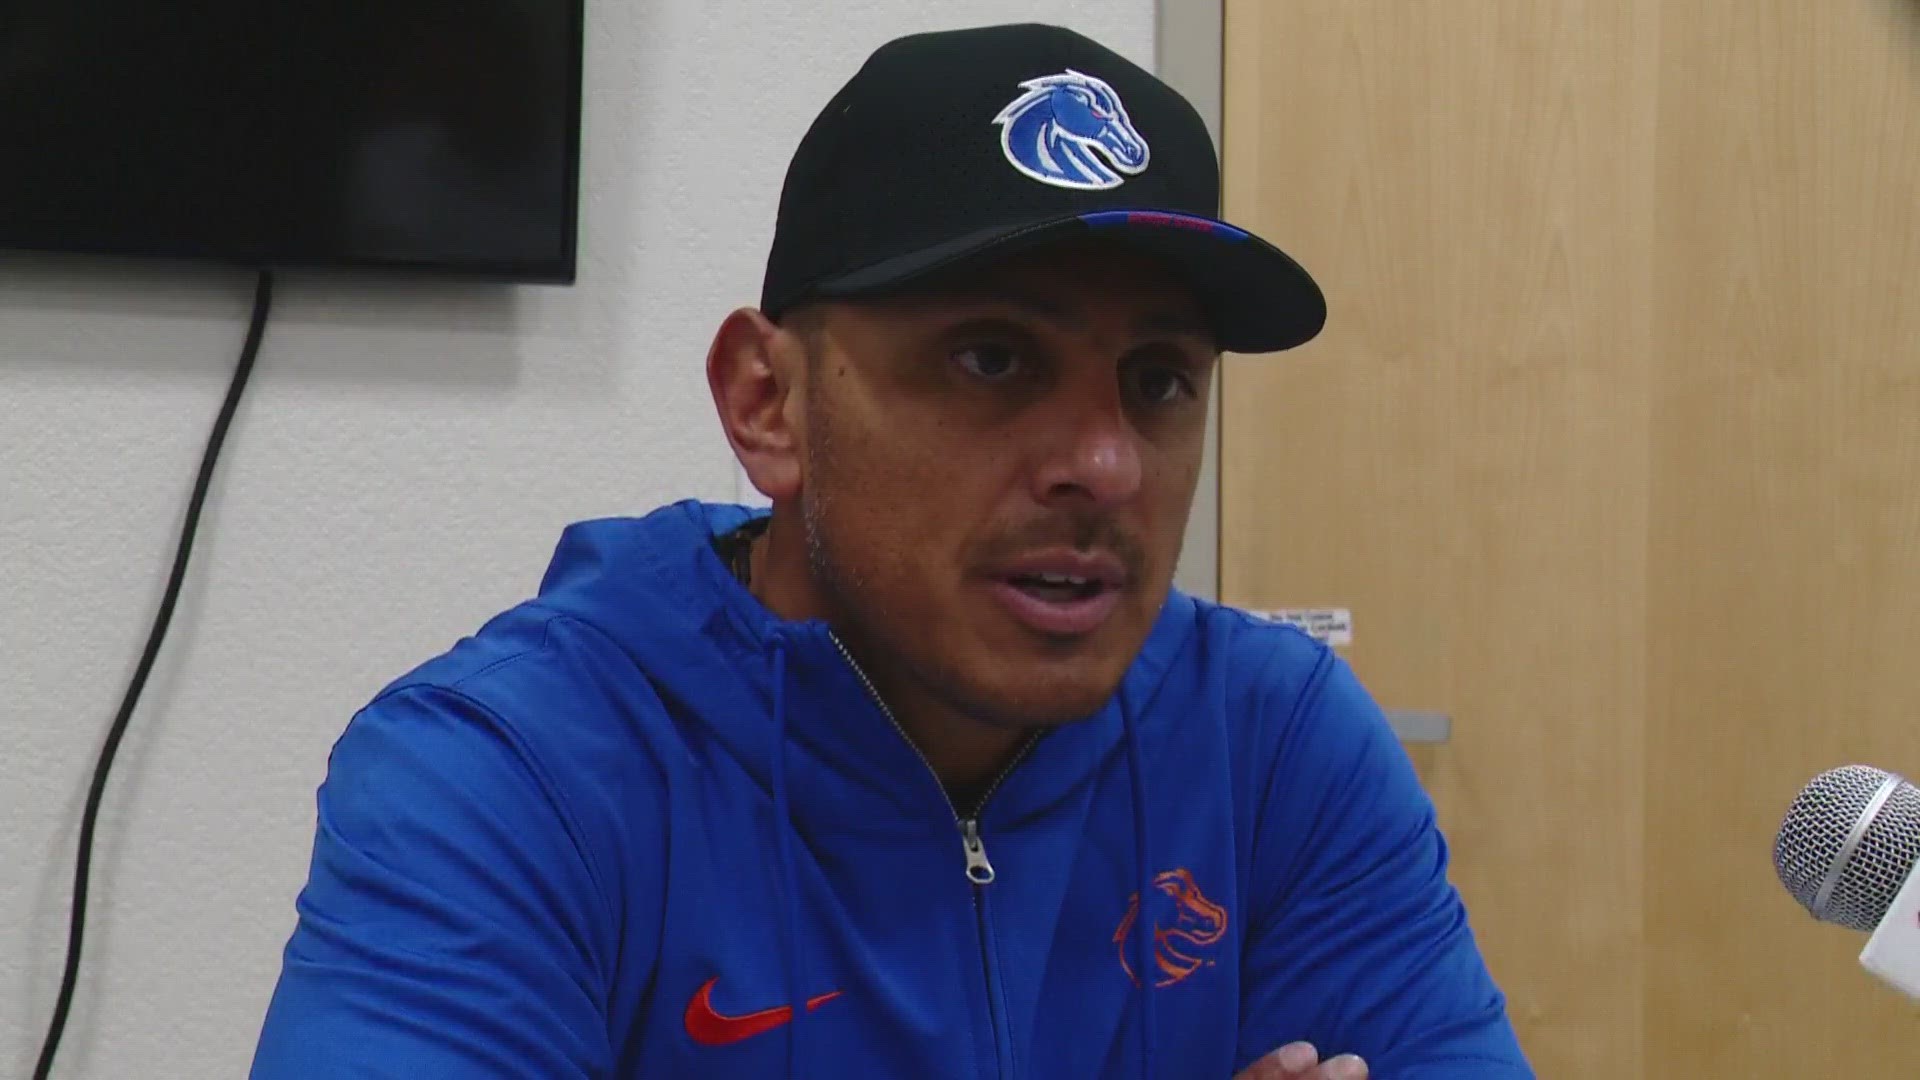 Avalos discusses Saturday's loss to rival Fresno State and Boise State falling to 4-5 for the first time since 1997. The Broncos host New Mexico next week.